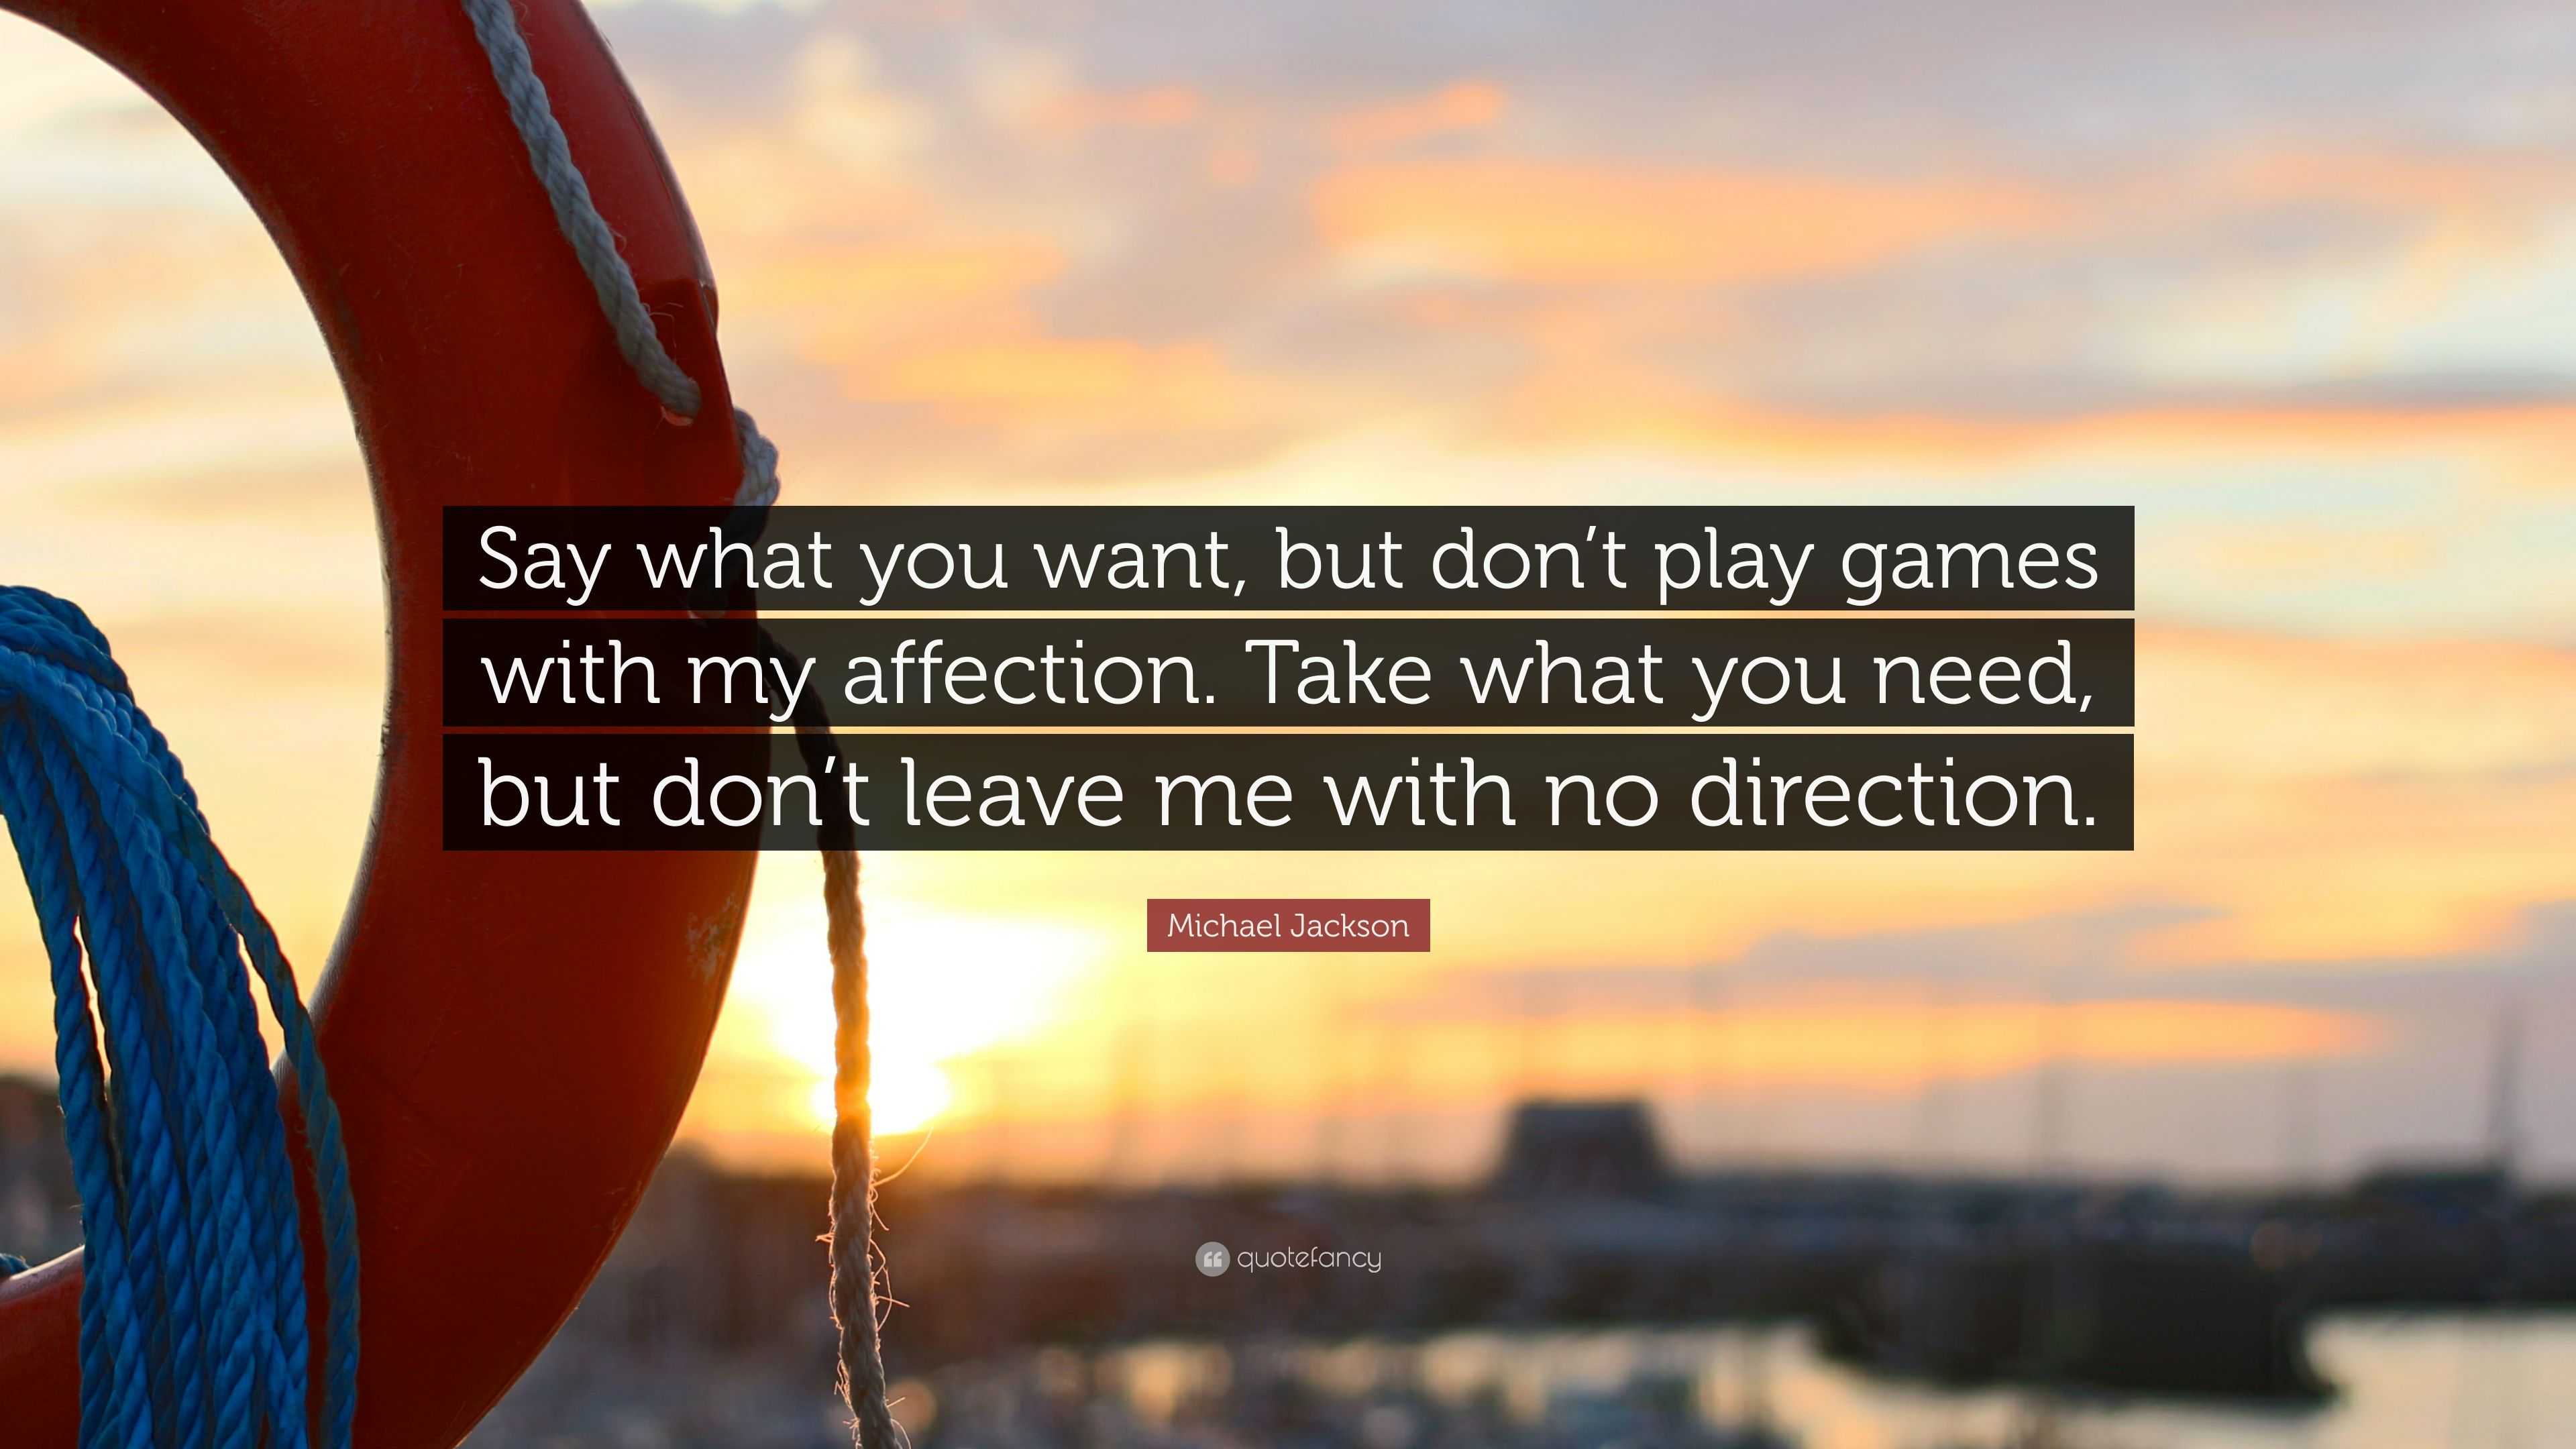 Michael Jackson Quote “Say what you want but don t play games